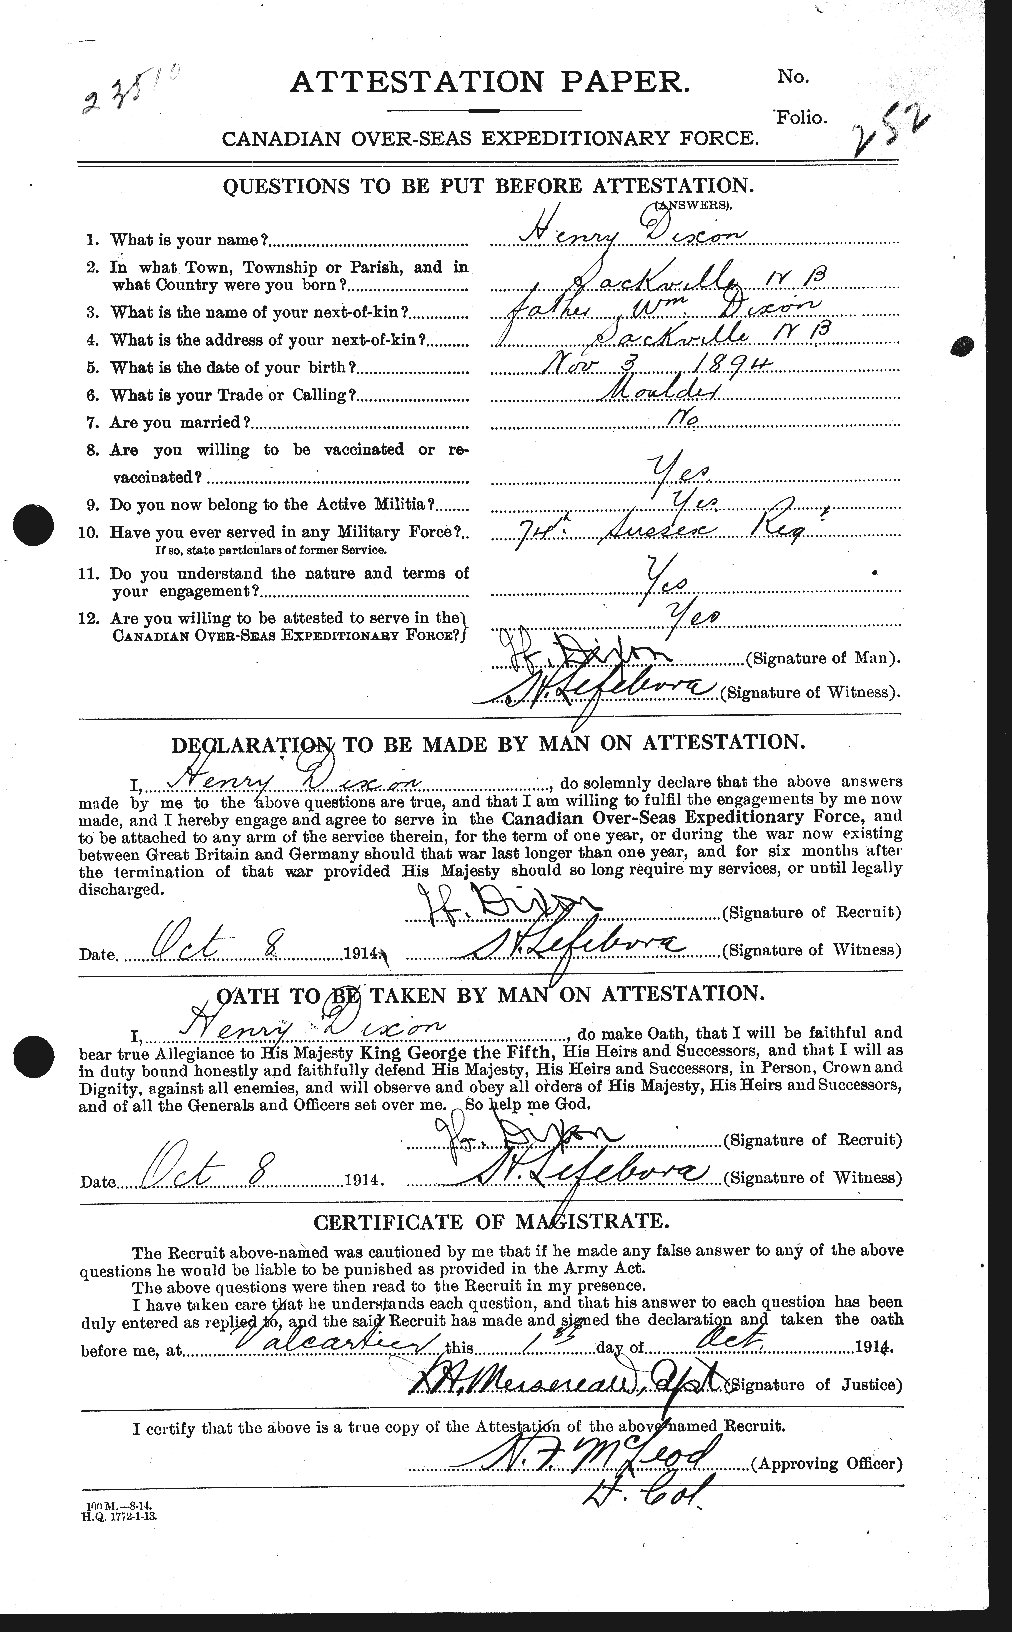 Personnel Records of the First World War - CEF 296768a